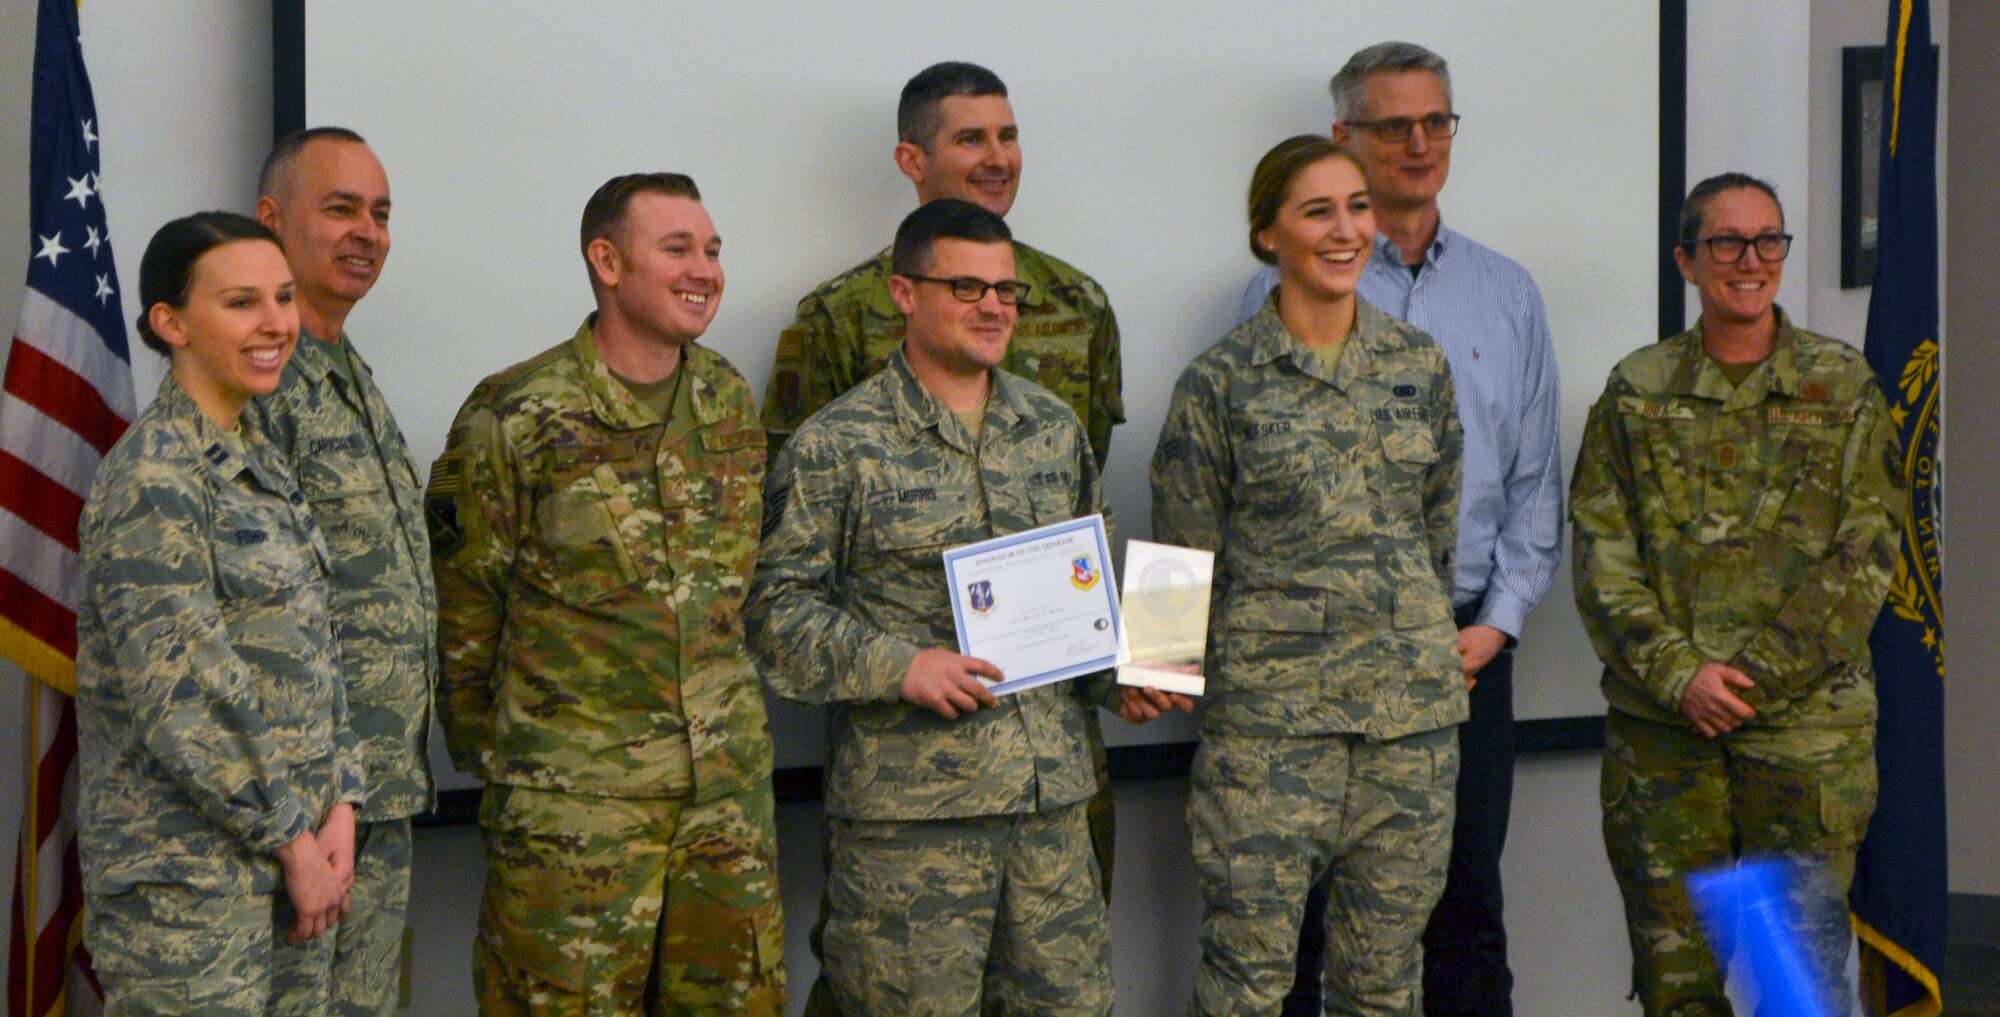 Airmen and guest judges celebrate the selection of Staff Sgt. Michael Morris as the winner of the 157th Air Refueling Wing's inaugural Spark Tank Alpha event, March 8, 2020, at Pease Air National Guard Base, N.H. The event promotes innovative ideas and concepts on improving the Air Force. From left, Capt. Emily Fisher, maintenance system software portfolio owner assigned to Kessel Run in Boston; Senior Master Sgt. Michael Caracoglia, Wildcat Spark Hub superintendent; Tech. Sgt. Jason Cuhna, contestant assigned to 157 Maintenance Group; Staff Sgt Michael Morris, winner and crew chief assigned to 157th Maintenance Group; Col. Todd Swass, 157th Air Refueling Wing vice commander; Senior Airman Emma Nofsker, contestant assigned to the 157th Logistics Readiness Squadron; Mr. Robert Miles, University of New Hampshire, senior lecturer decision sciences; and Chief Master Sgt. Erica Rhea, 157th Air Refueling Wing command chief; (Courtesy photo by Desirae Caracoglia)